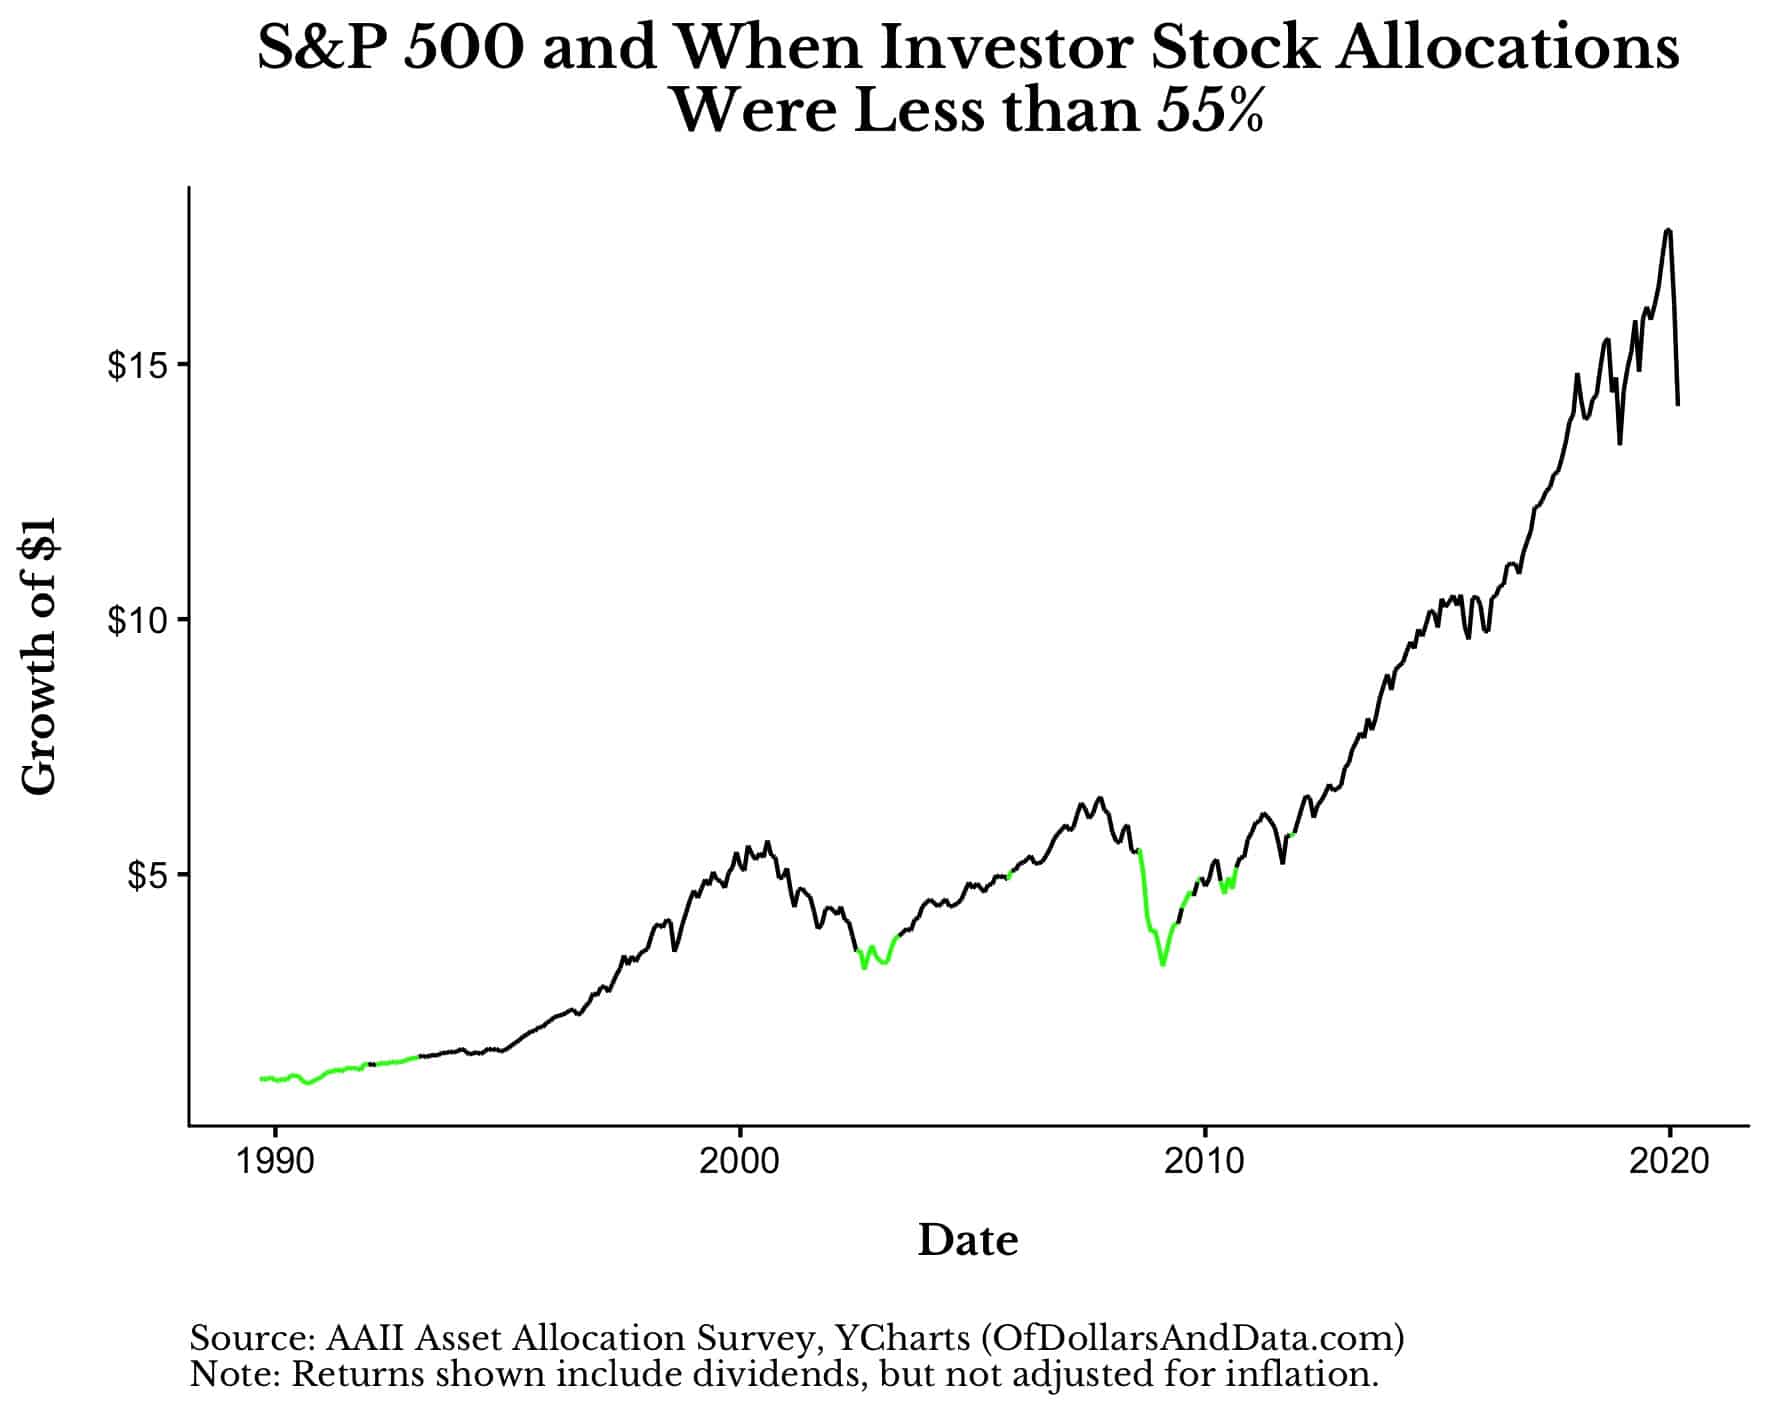 S&P 500 and when investor stock allocations are below 55%